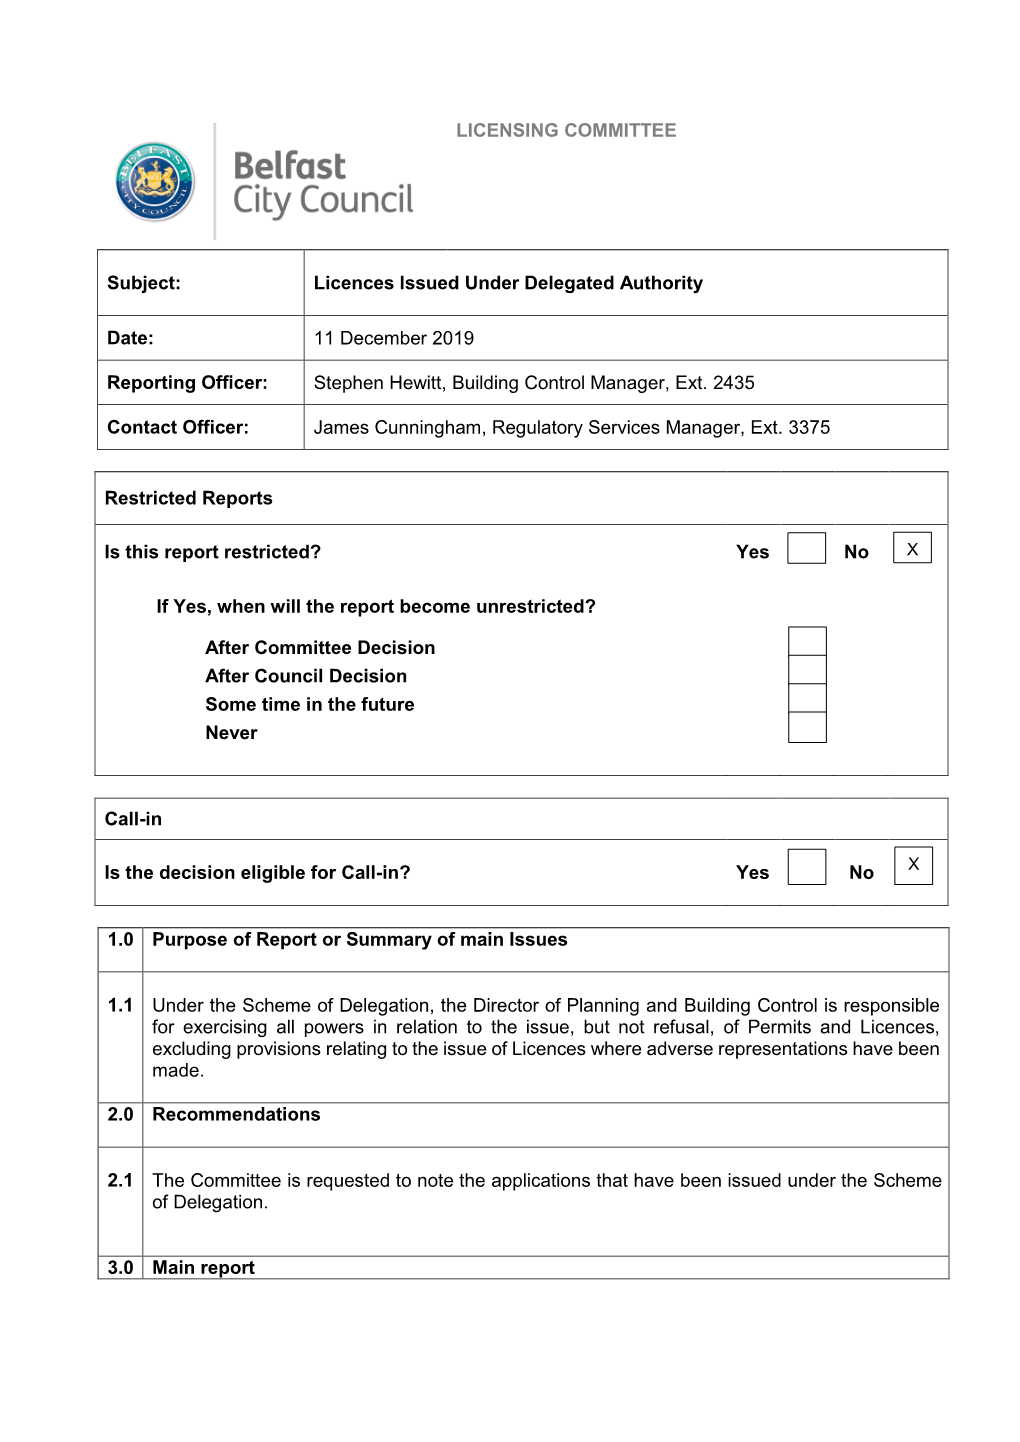 LICENSING COMMITTEE Subject: Licences Issued Under Delegated Authority Date: 11 December 2019 Reporting Officer: Stephen Hewitt